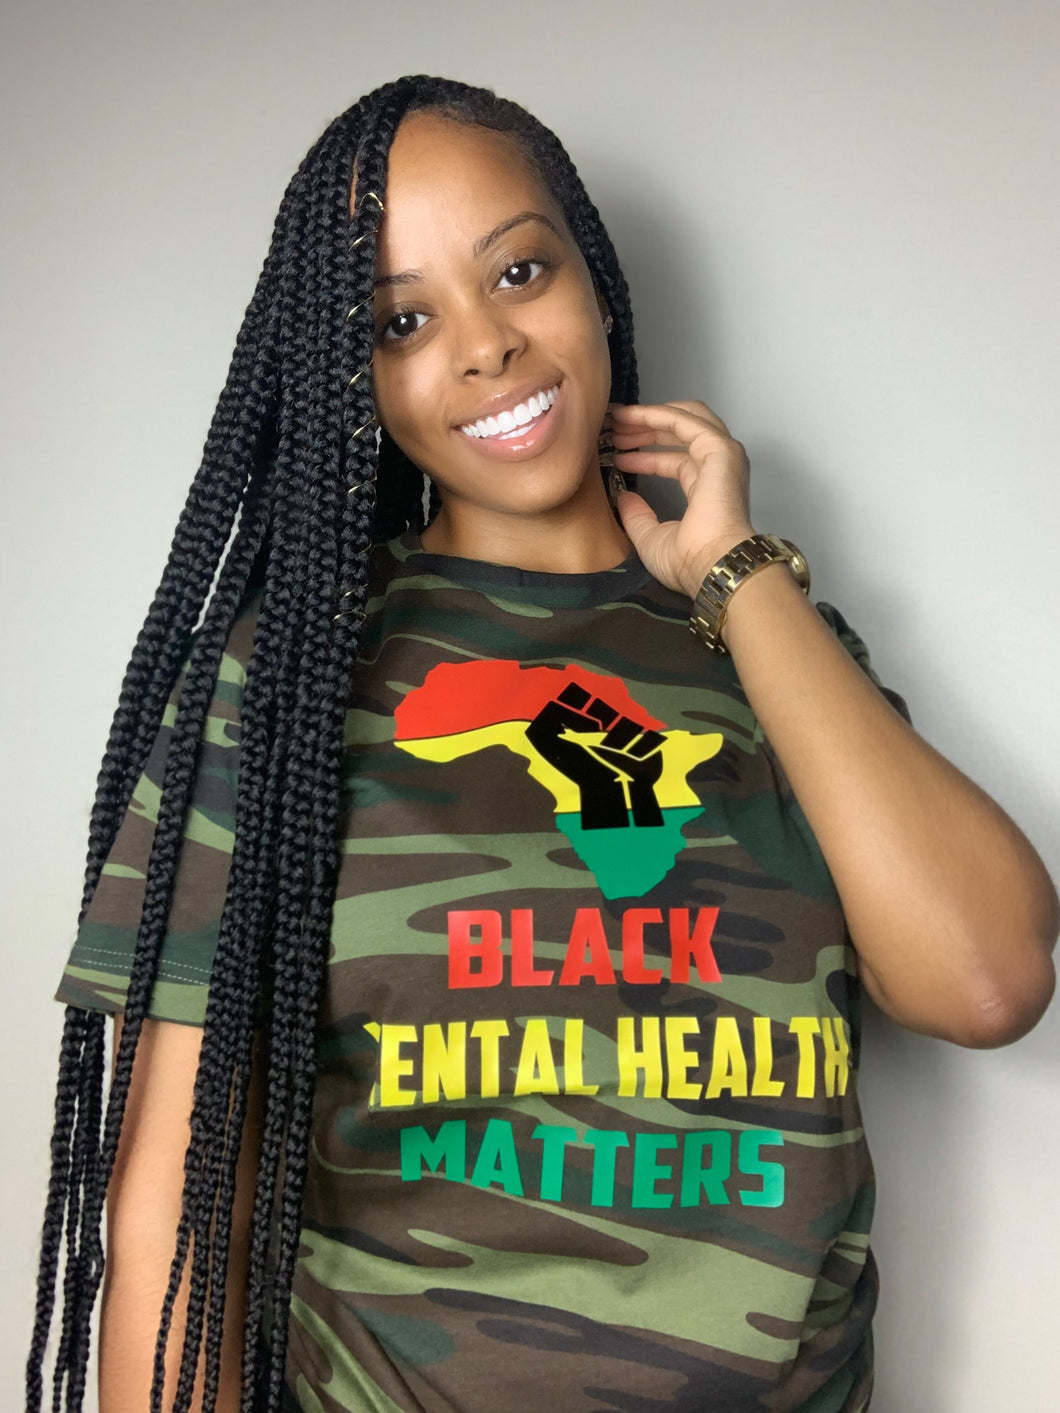 Black Mental Health Matters- Limited Edition [Camo]